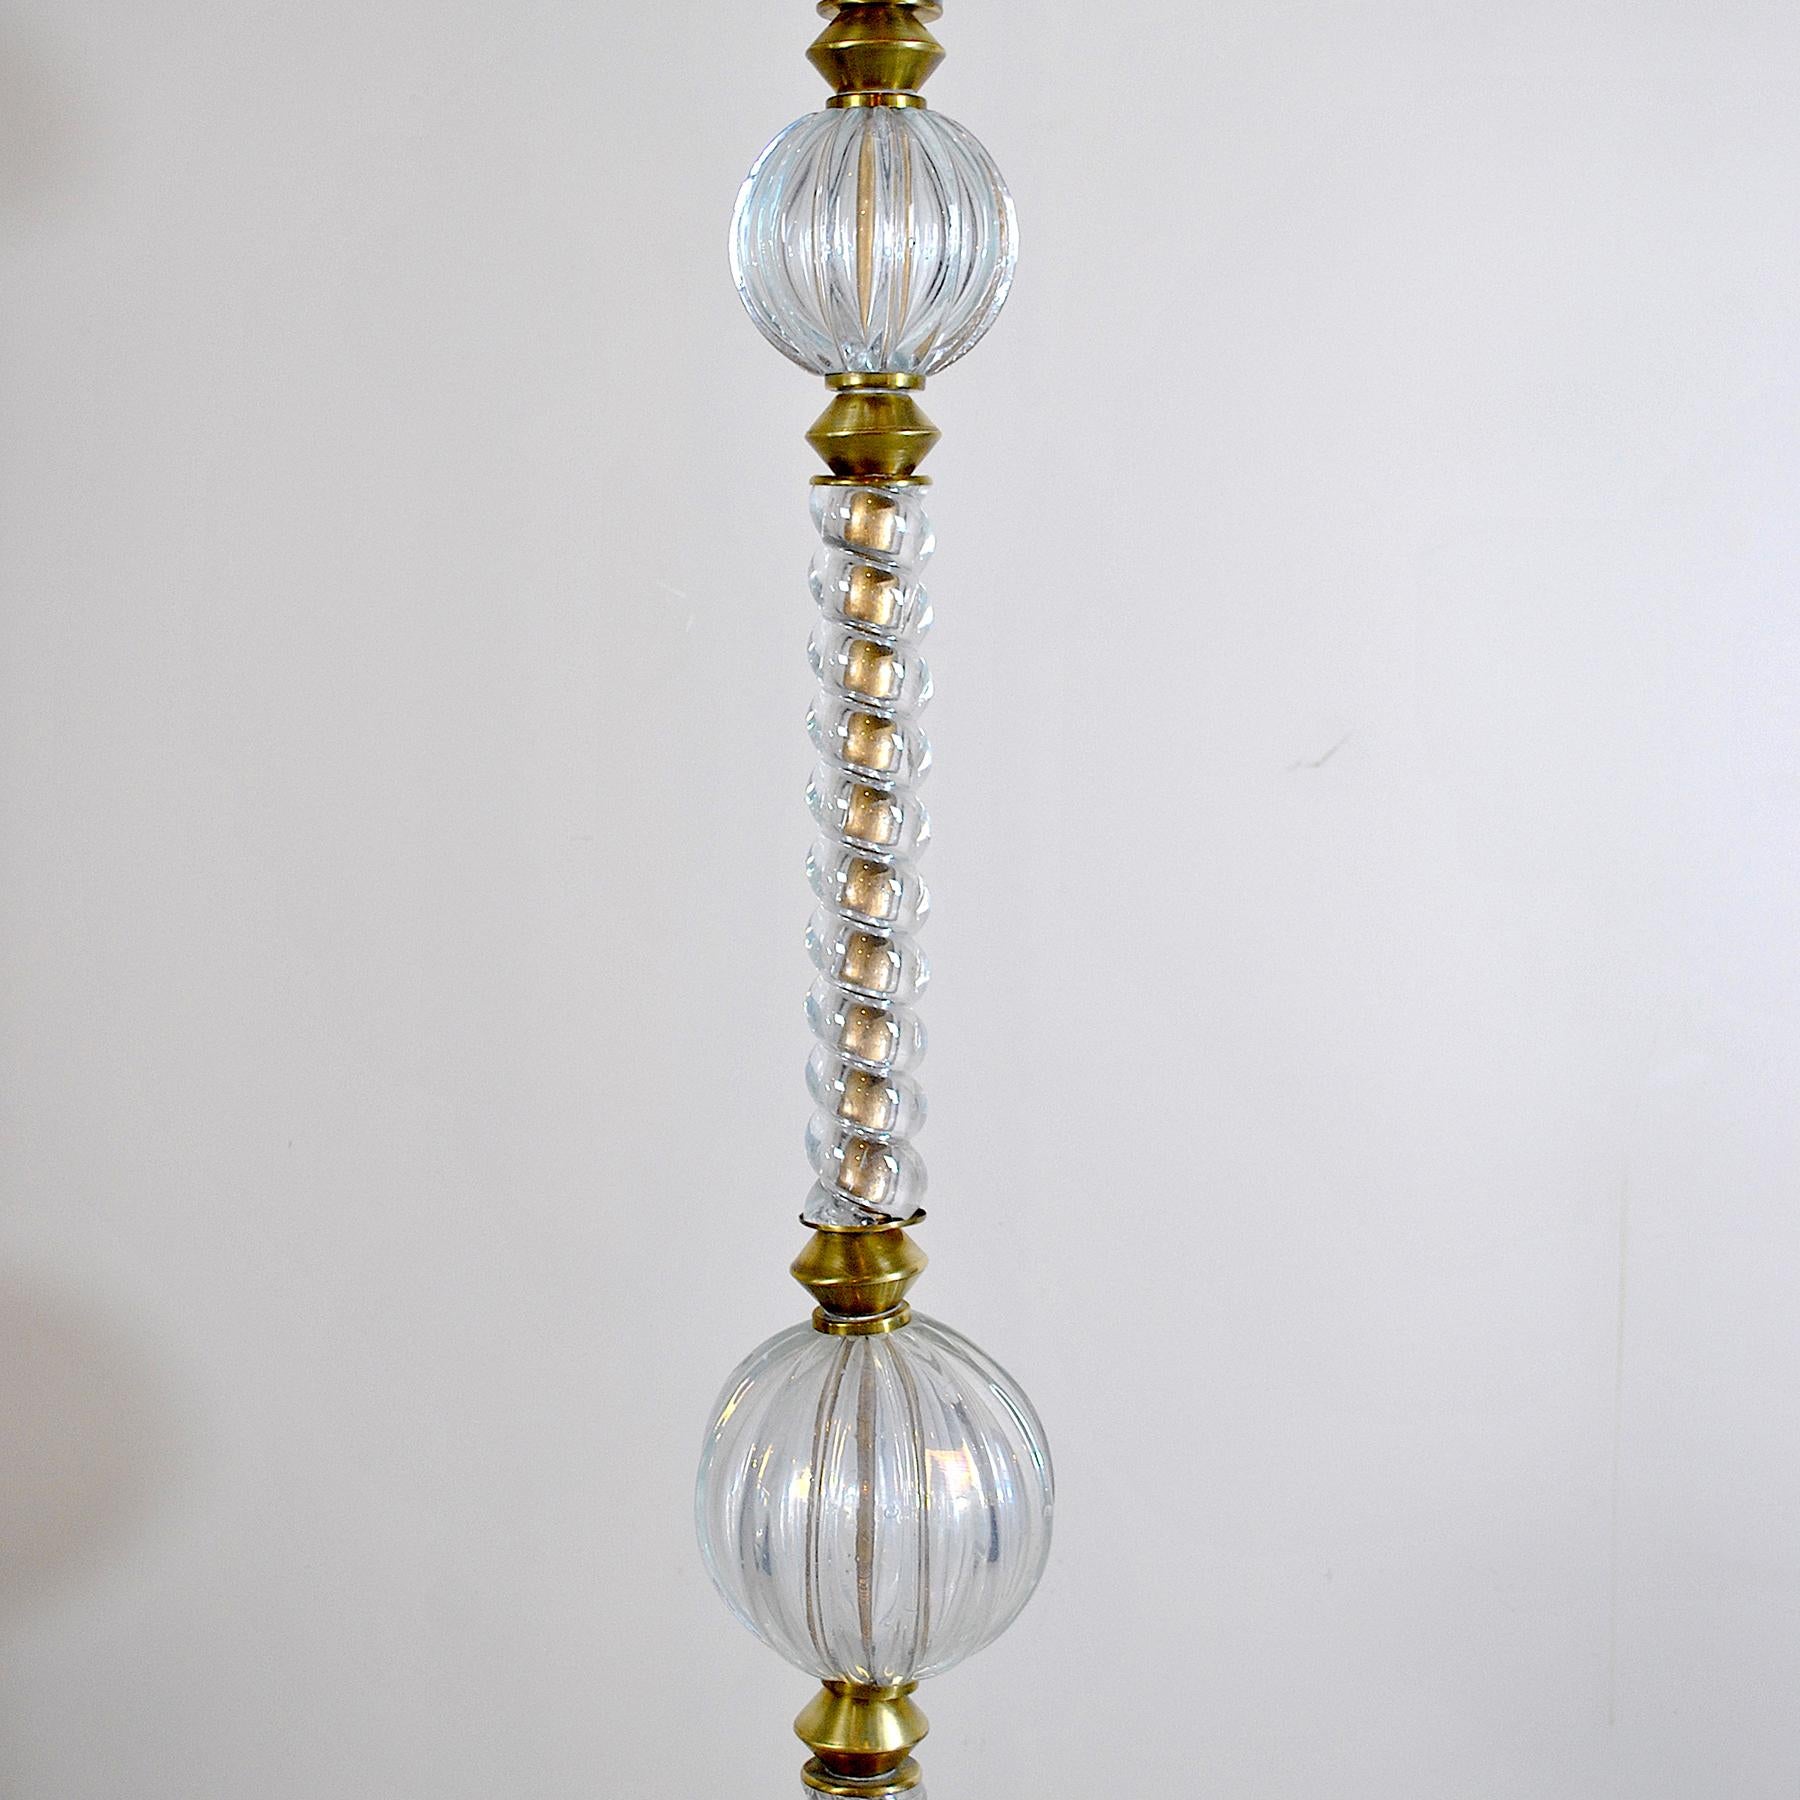 Italian Midcentury Floor Lamp by Barovier & Toso In Good Condition For Sale In bari, IT